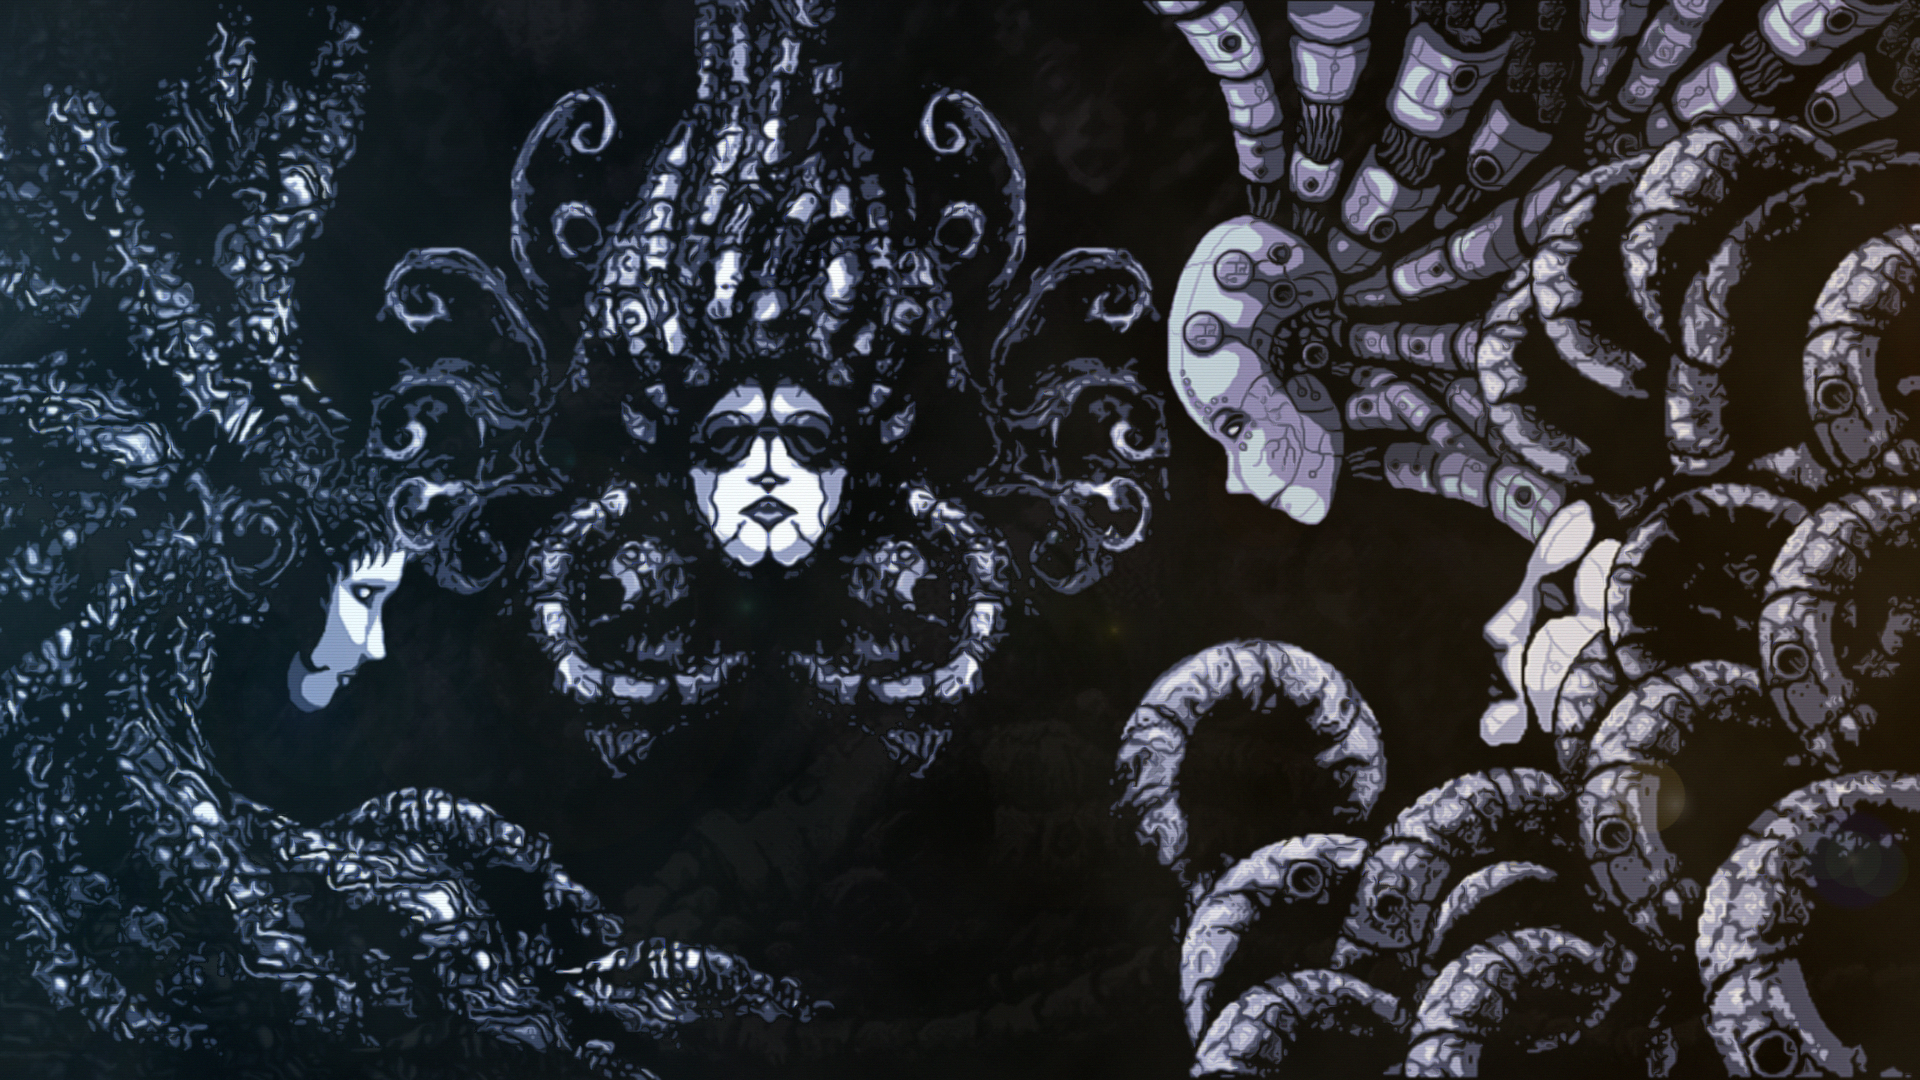 Axiom Verge 01 by xenith800 on Newgrounds